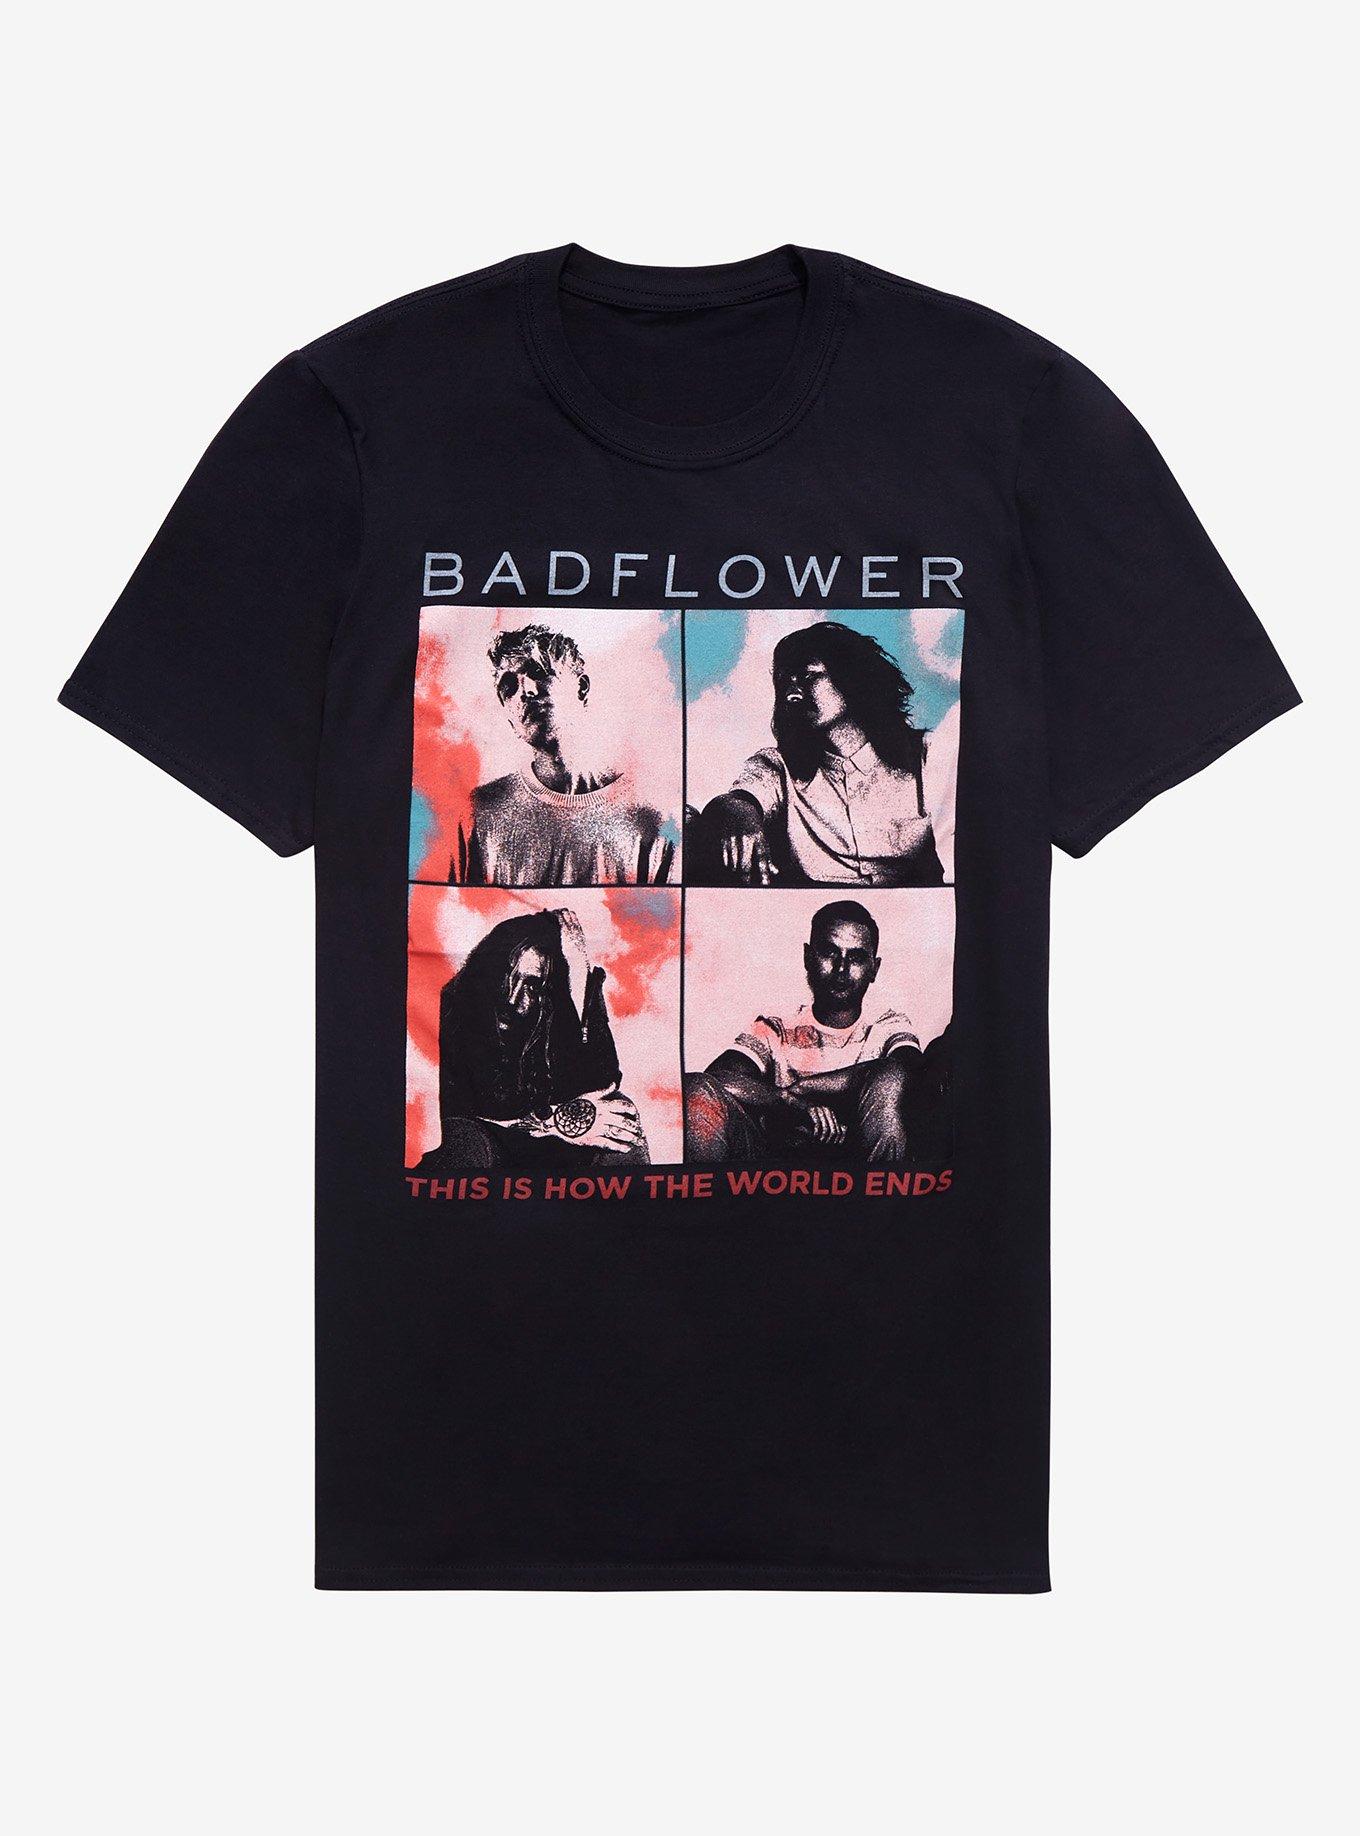 Badflower This Is How The World Ends T-Shirt, BLACK, hi-res